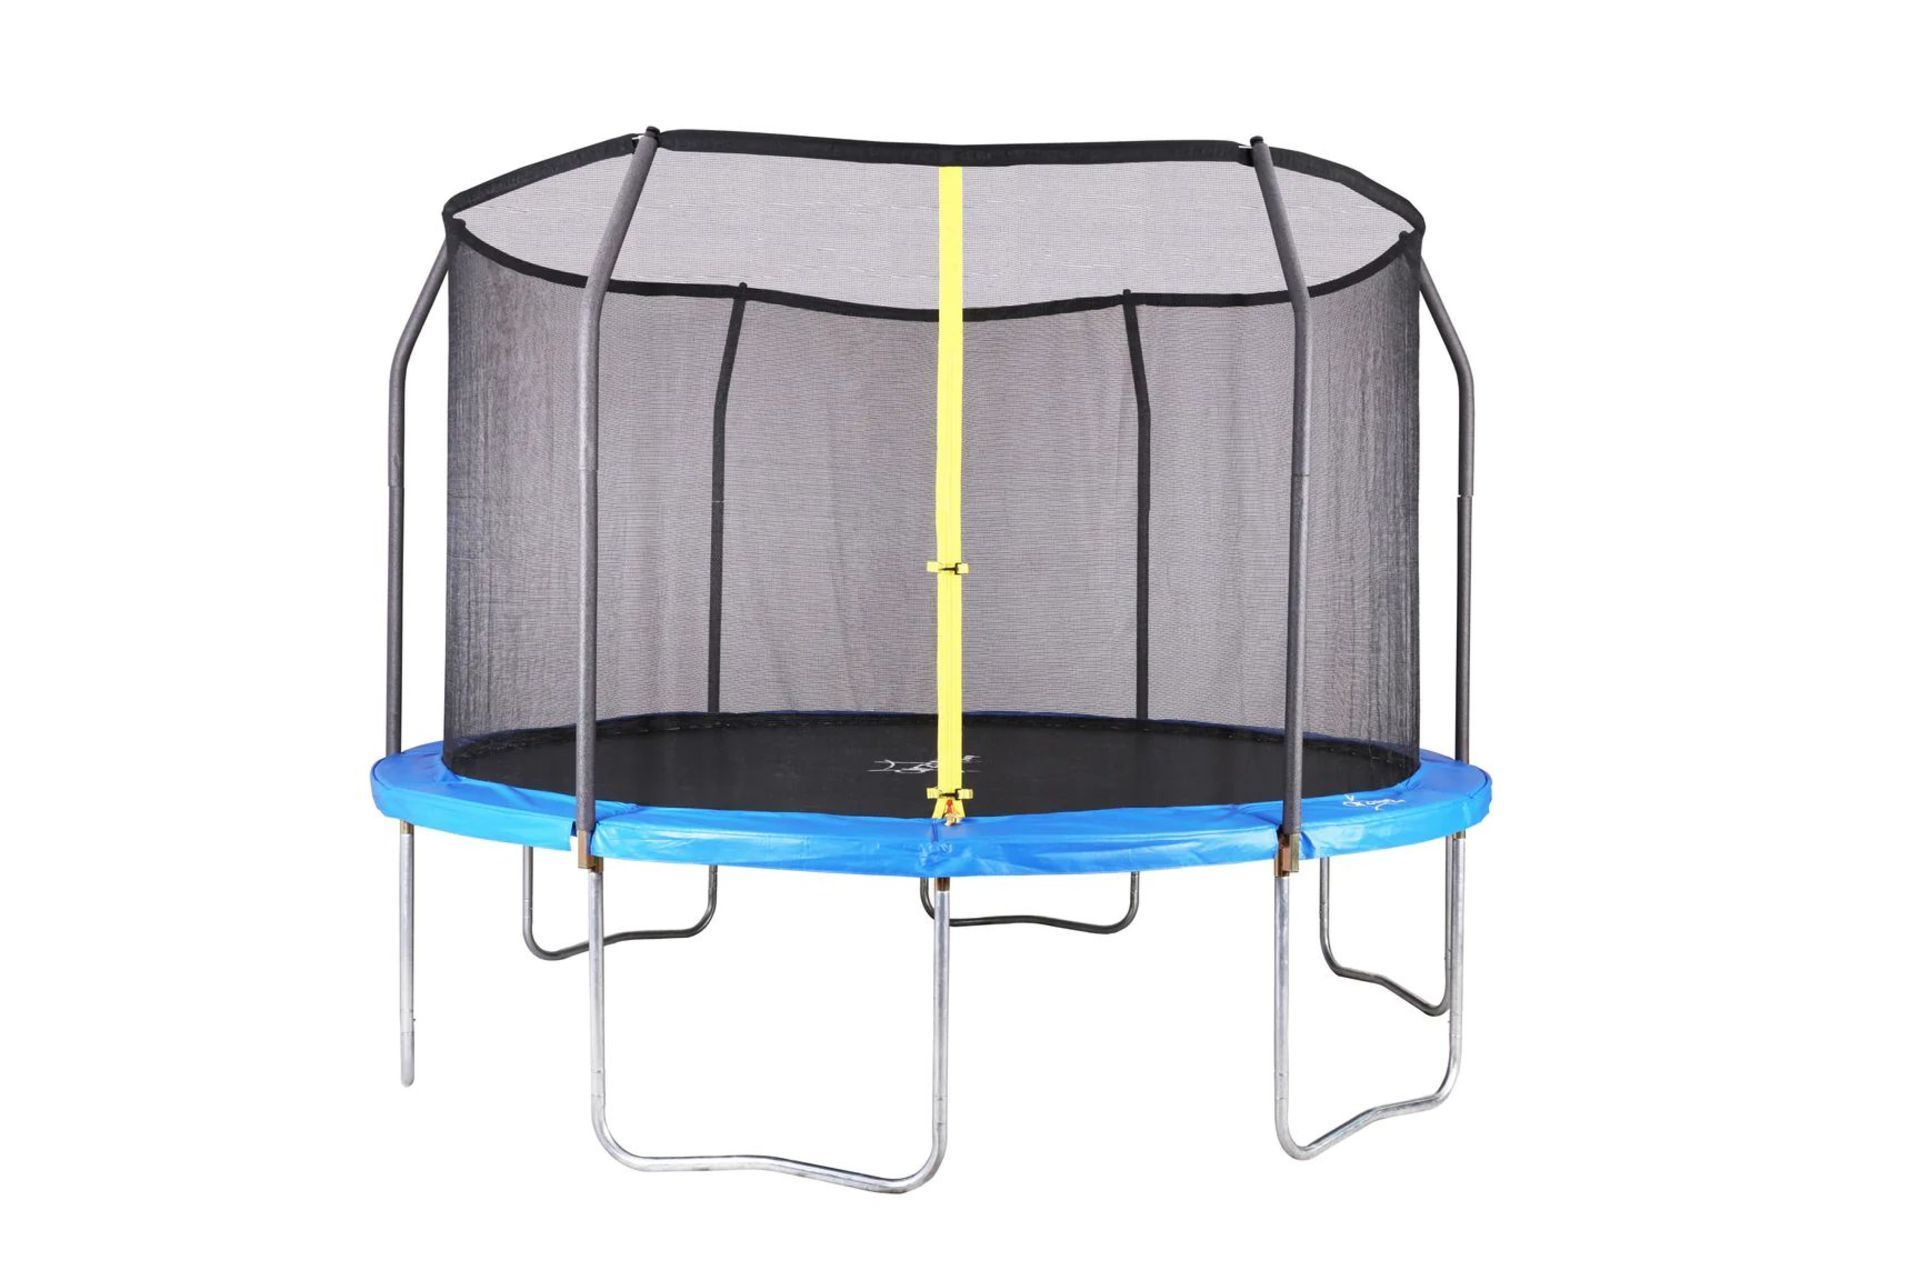 Pallet To Include 6 X New & Boxed Airzone 12 Foot Trampoline with Enclosure. The AirZone Jump 12